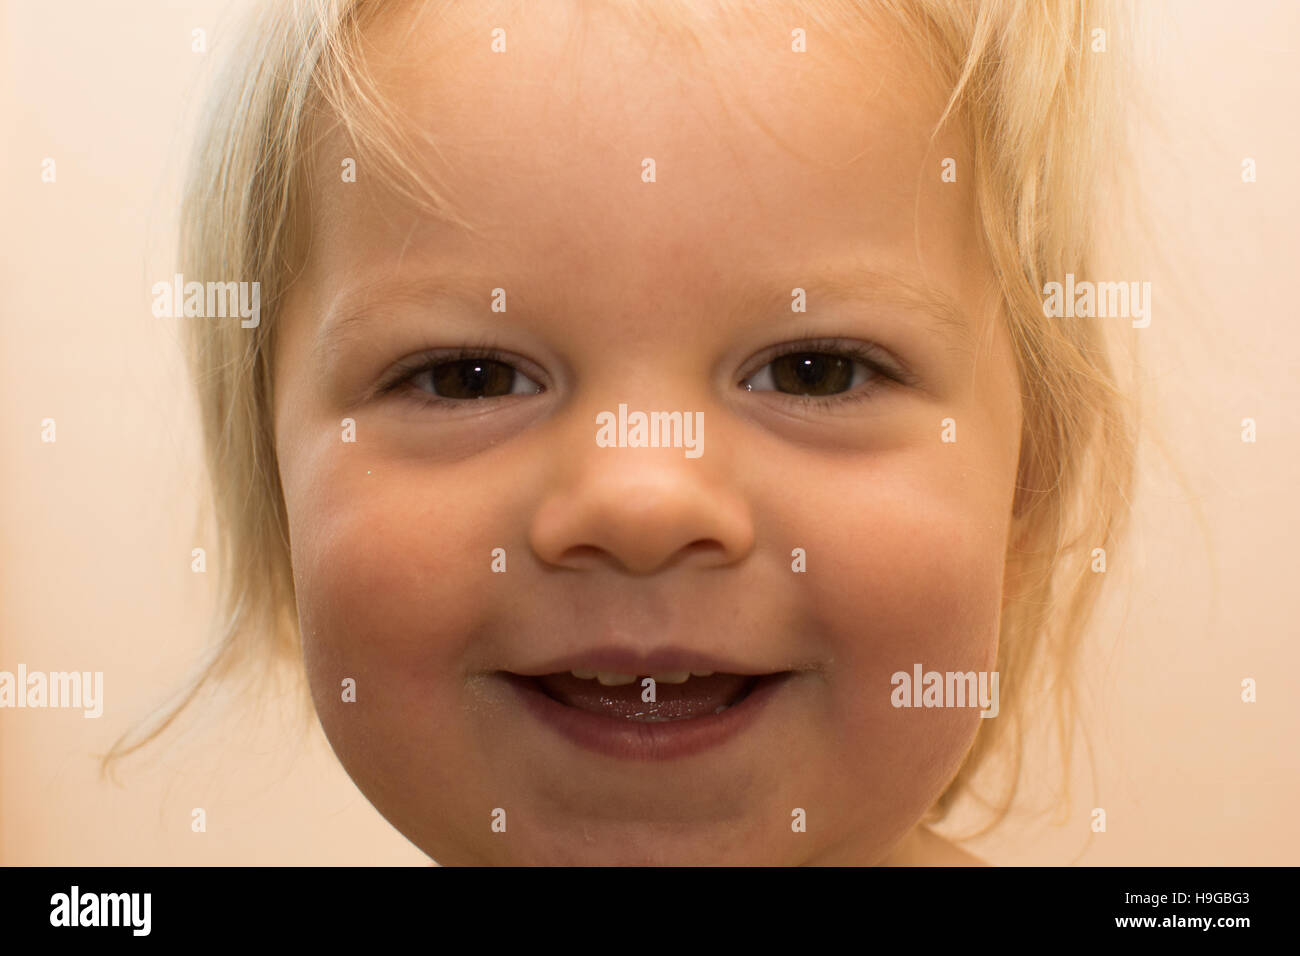 1 year old blond girl looking directly into camera with cheeky grin and brown eyes Stock Photo